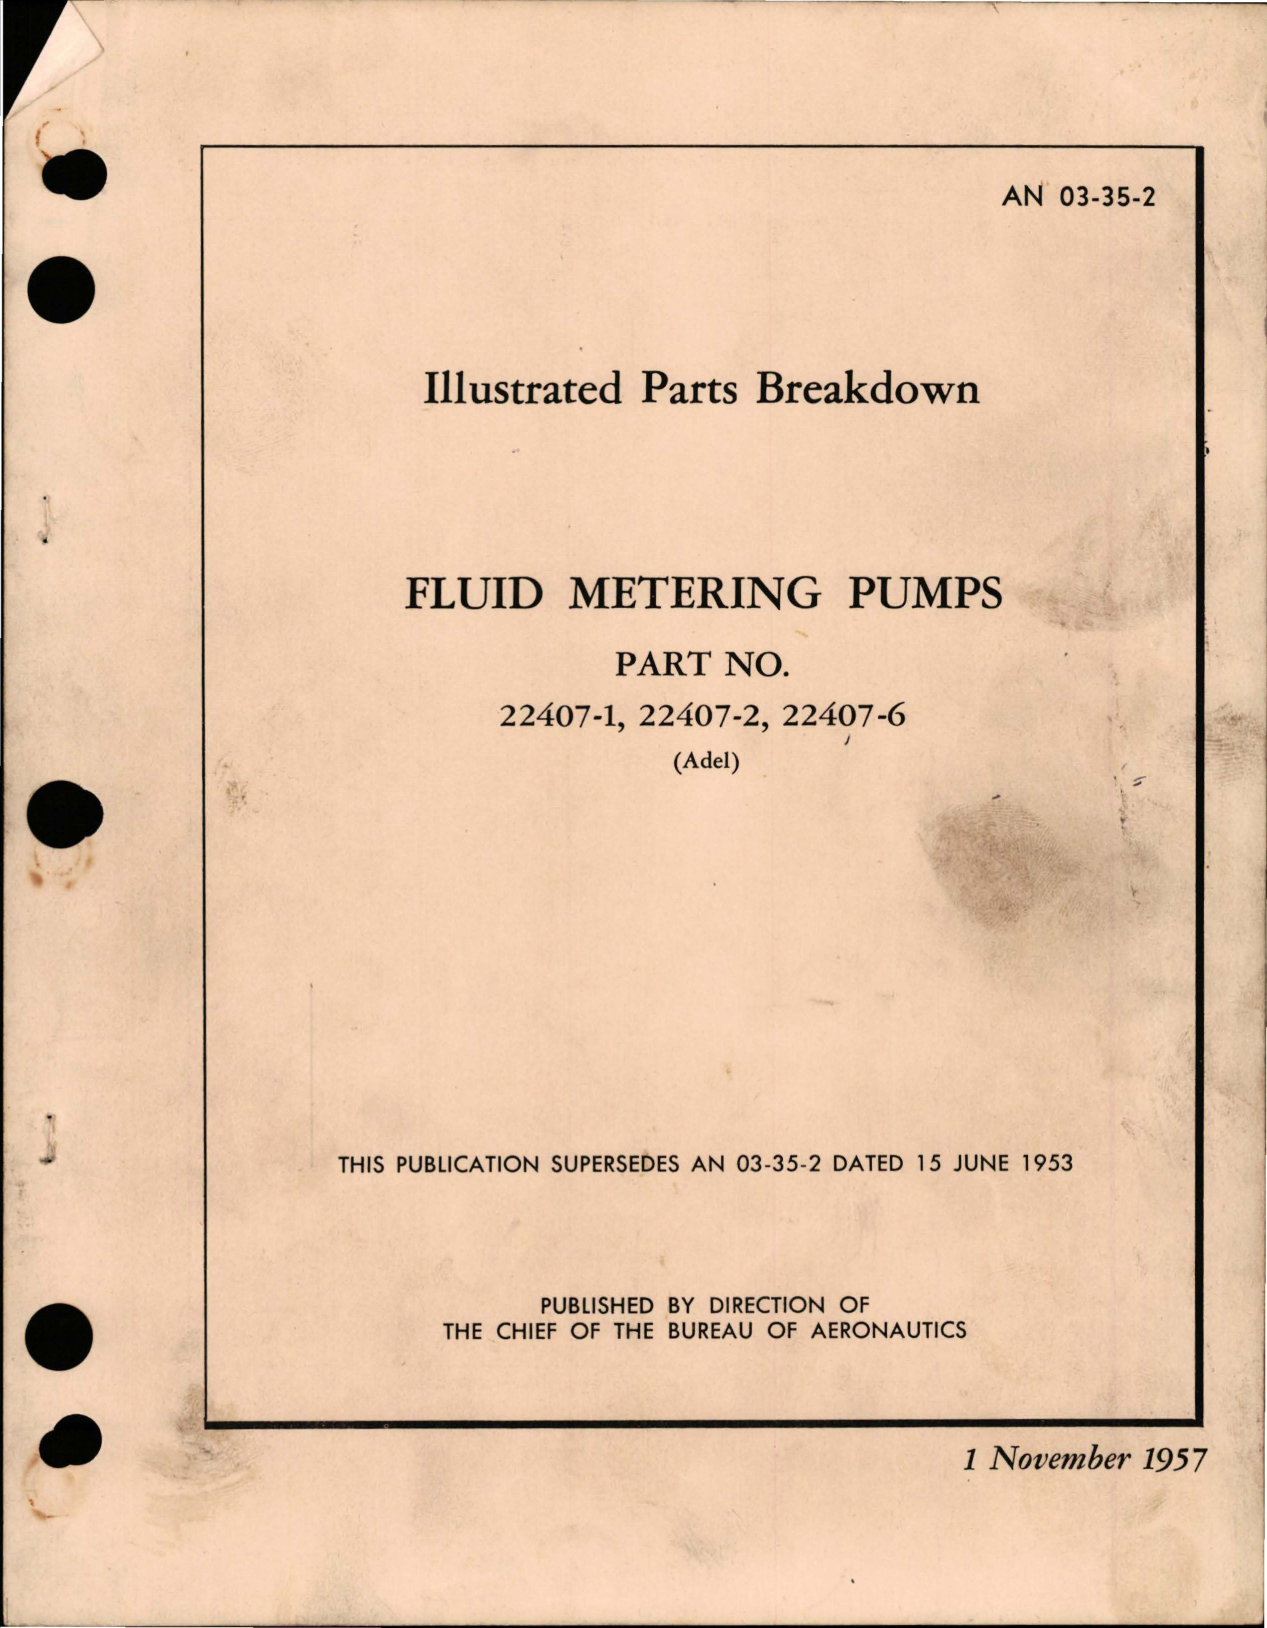 Sample page 1 from AirCorps Library document: Illustrated Parts Breakdown for Fluid Metering Pumps - Parts 22404-1, 224047-2, and 224047-6 